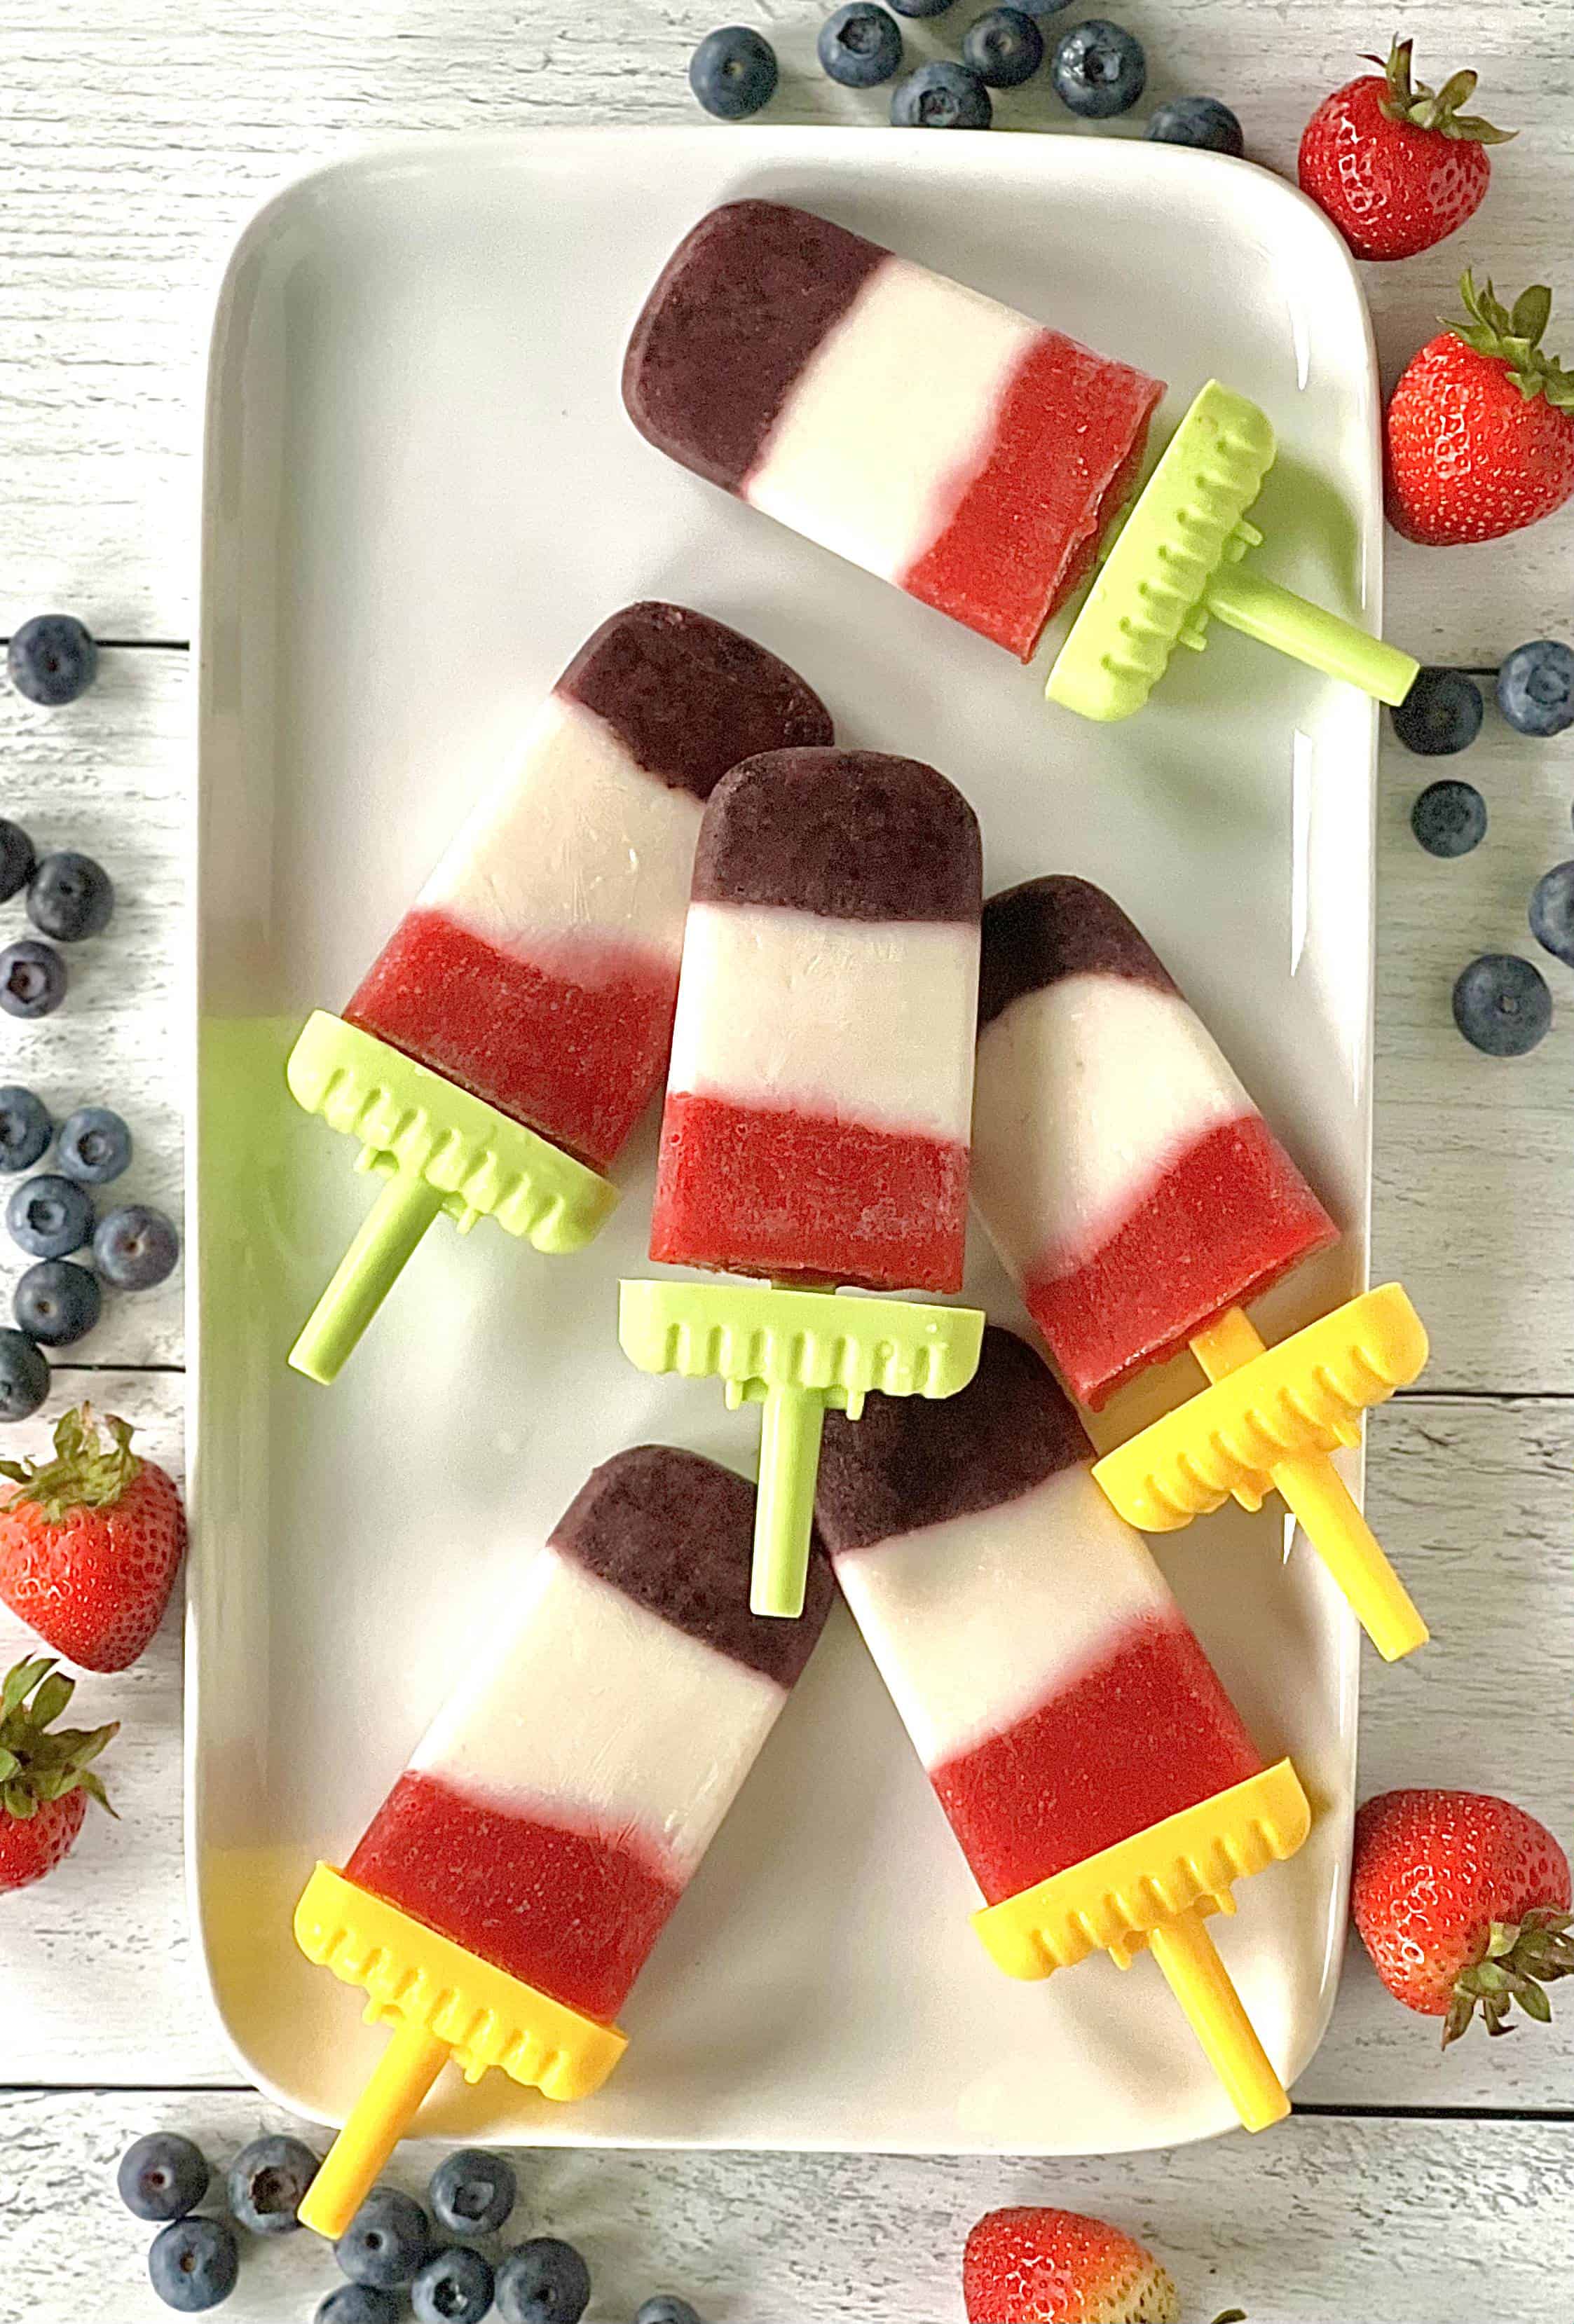 Strawberry, blueberry and yogurt popsicles on a long white platter surrounded by blueberries and strawberries.